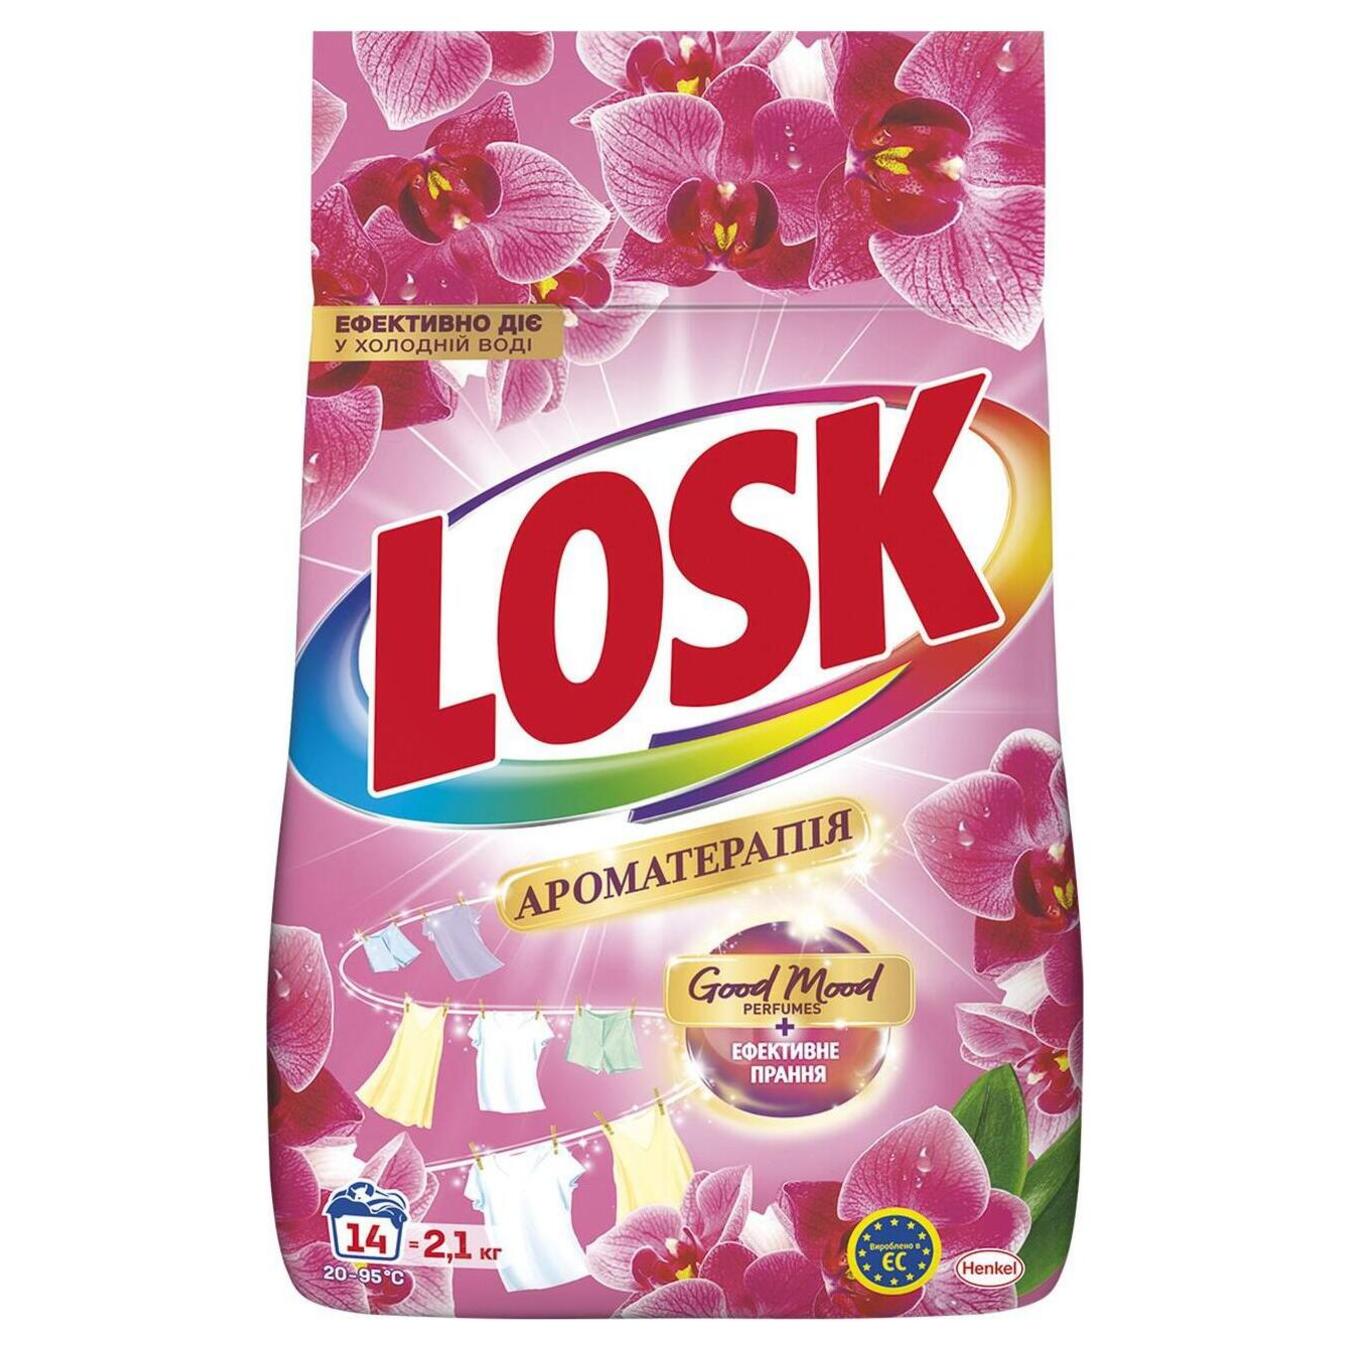 Washing powder machine Losk JSC Essential oils and aroma of Malaysian flower 2.1 kg